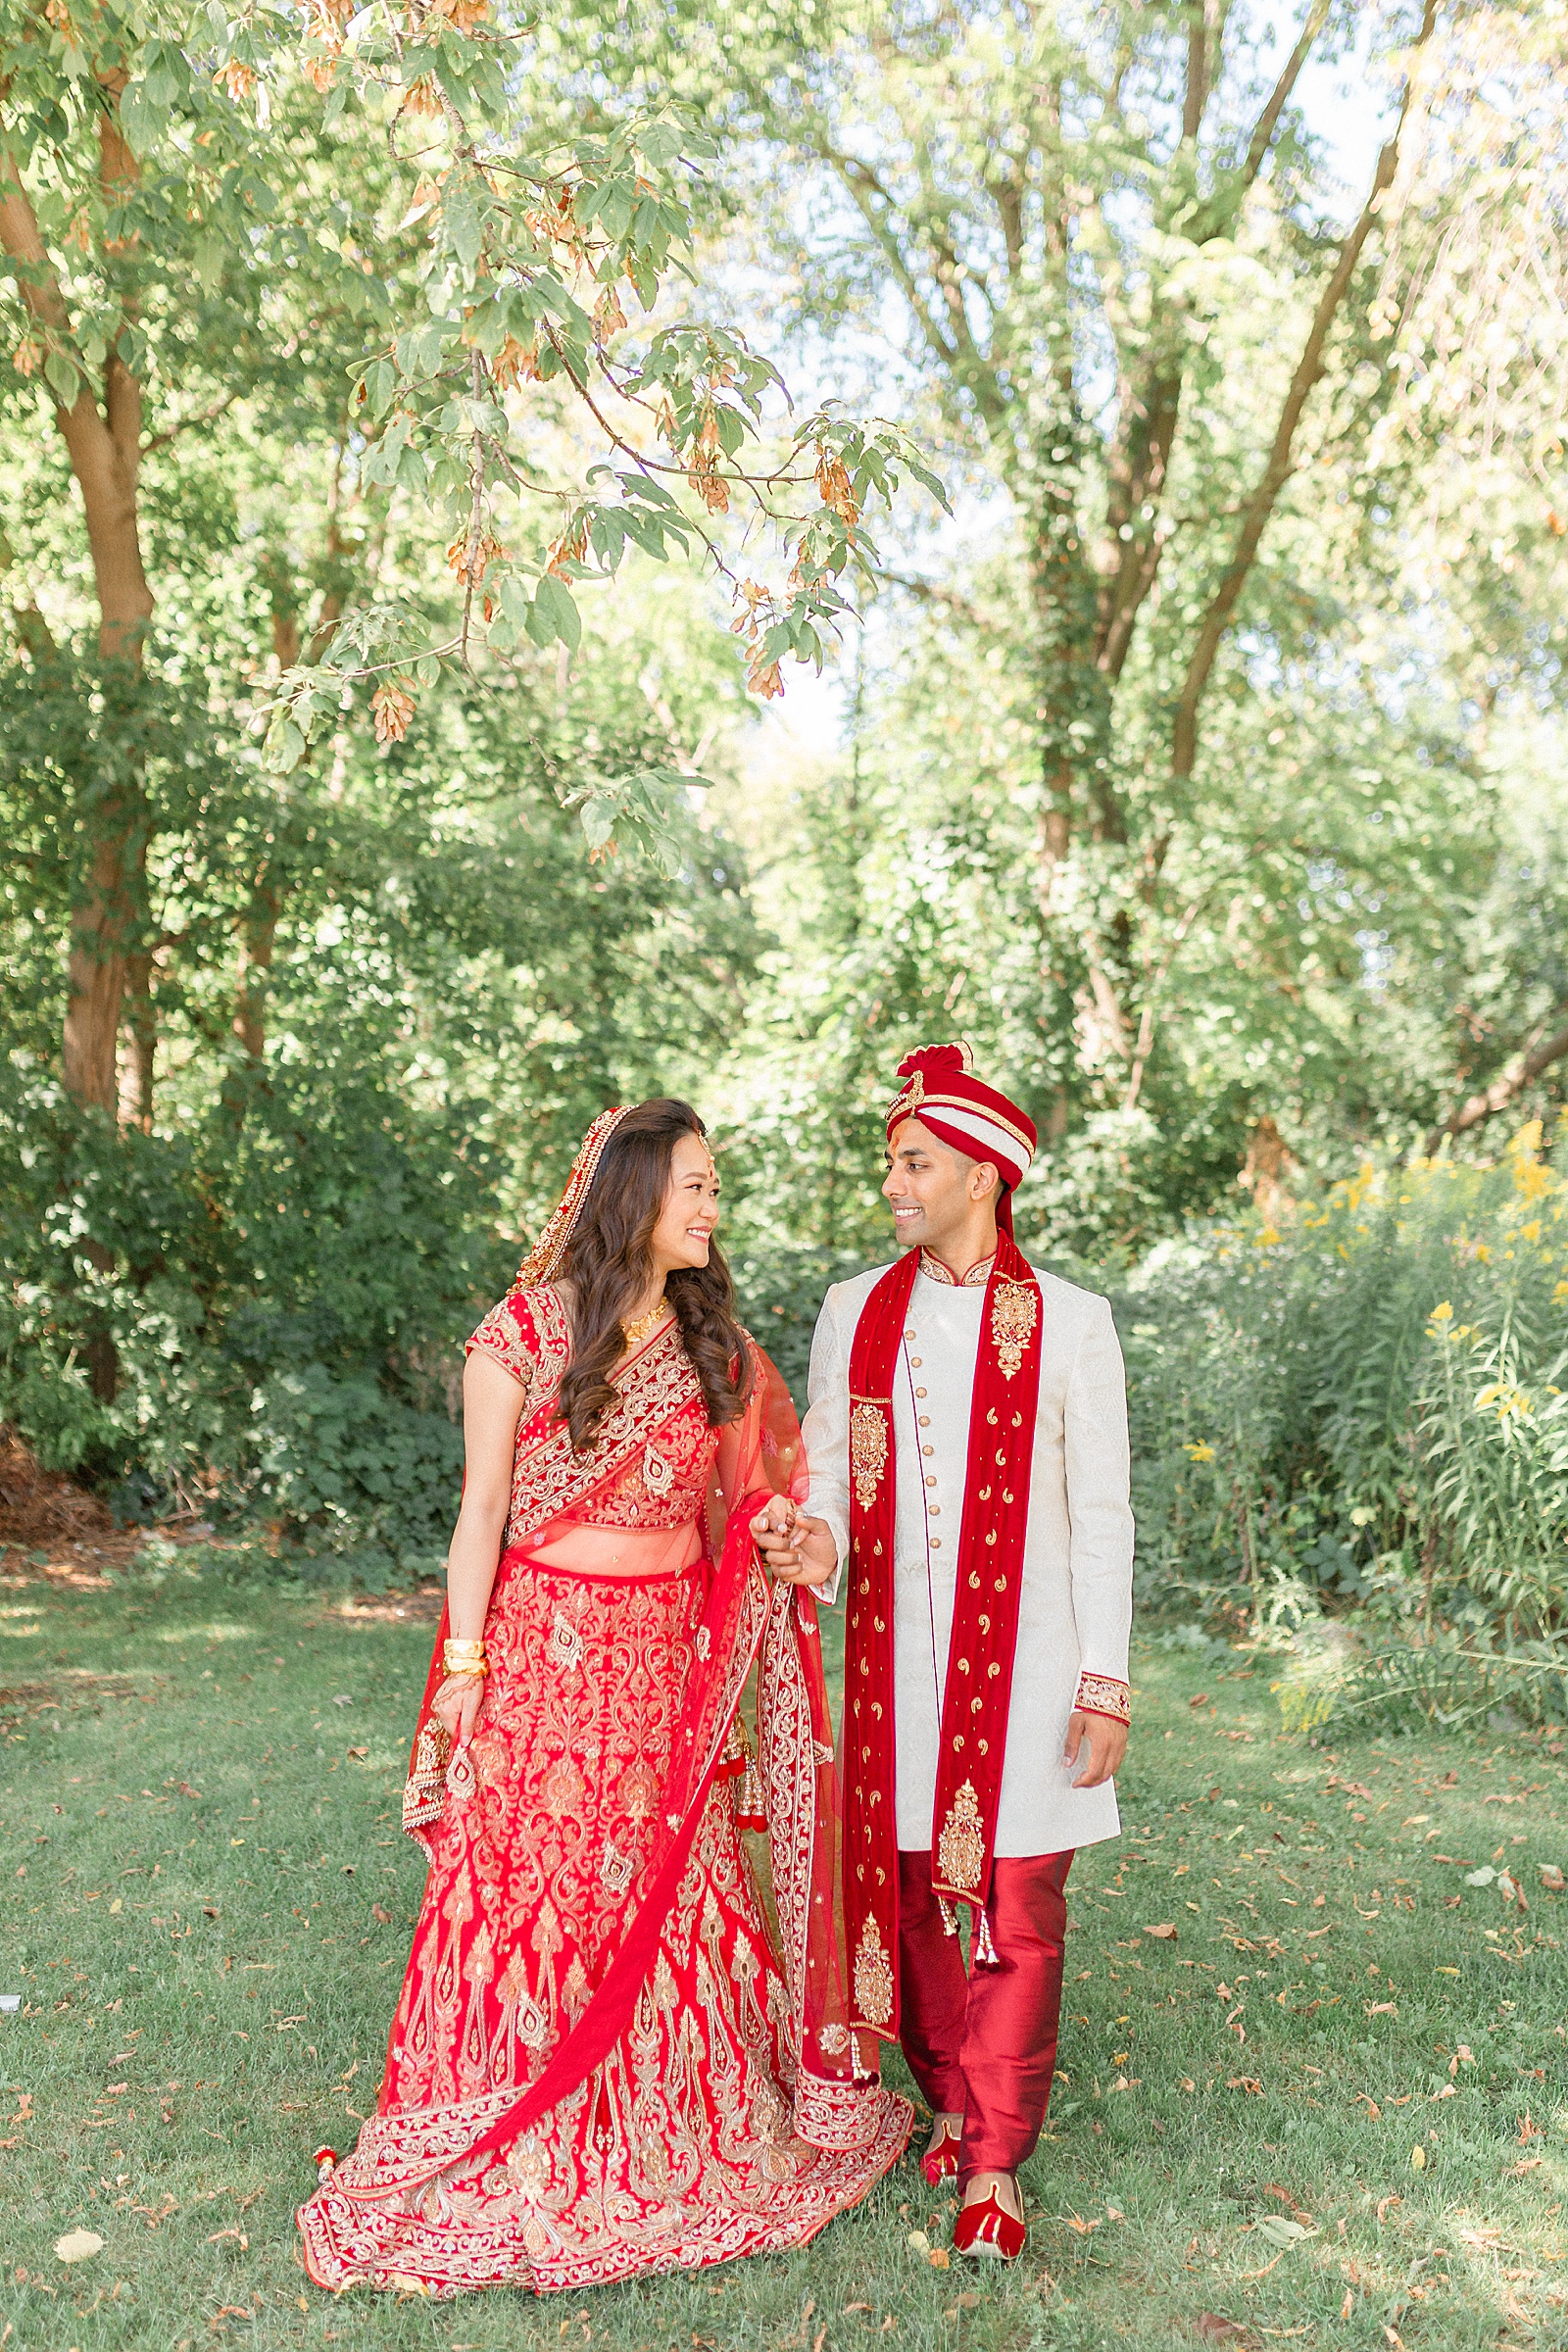 Bride and Groom at Indian Ceremony